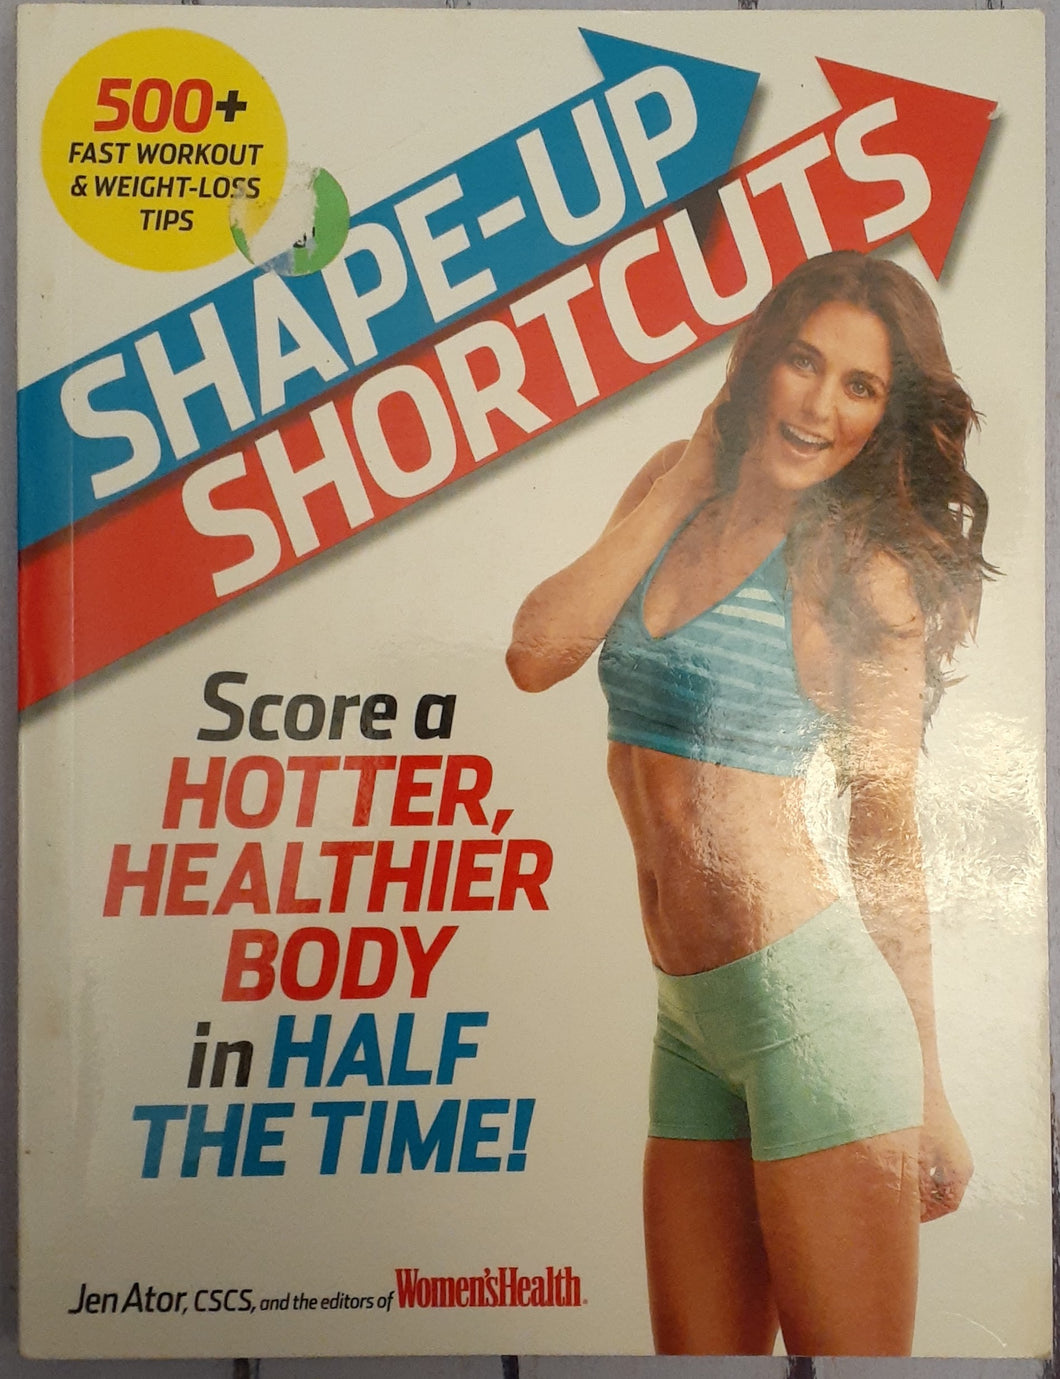 Shape-Up Shortcuts: Quick HIIT Workouts, Easy Recipes, & Stress-Free Strategies for Managing a Healthy Life